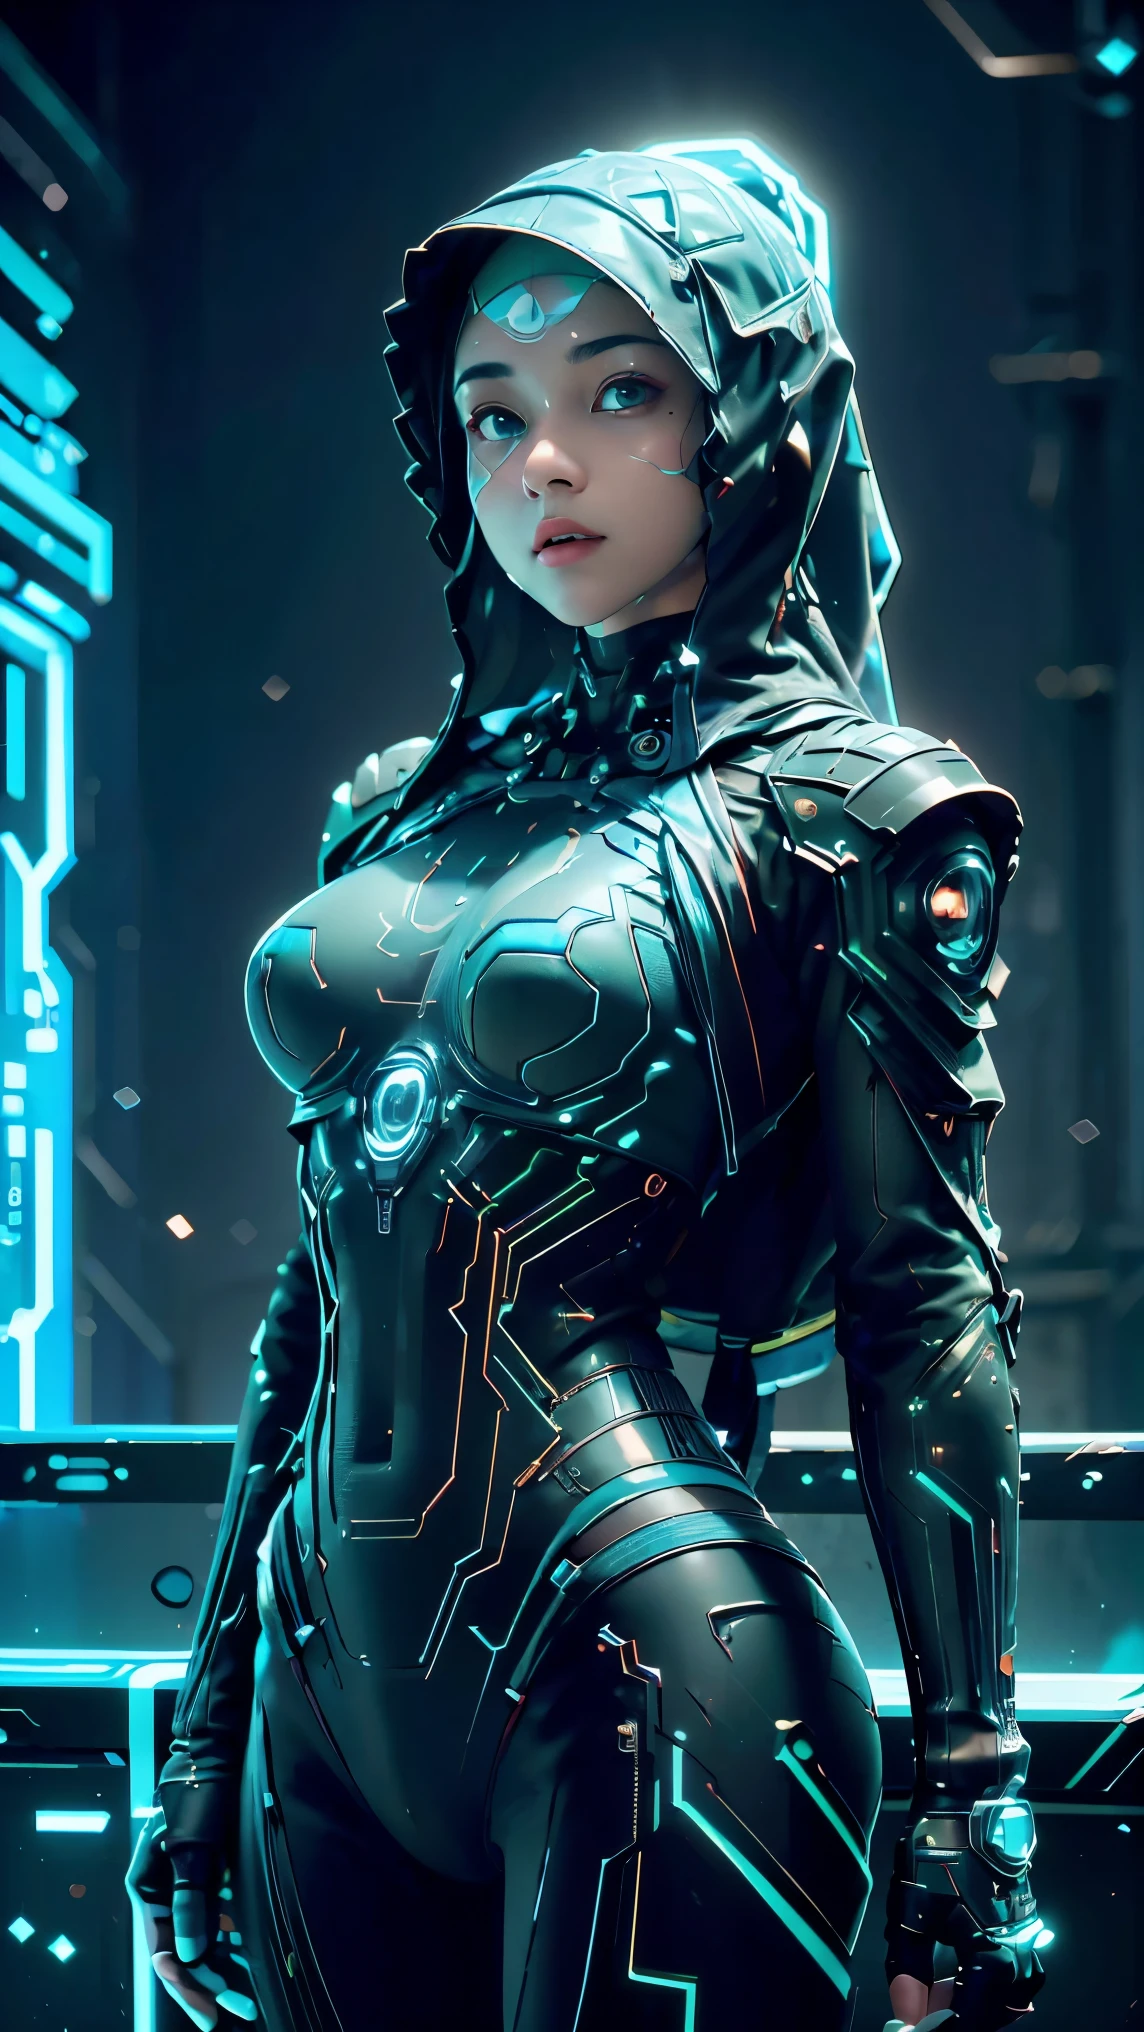 ((Best quality)), ((masterpiece)), (detailed:1.4), 3D, a beautiful cyberpunk female figure with VAIL or HIJAB, (full-coverage electronic leather suit), light particles, pure energy chaos anti-technology, HDR (high dynamic range), ray tracing, NVIDIA RTX, Super-Resolution, Unreal 5, Subsurface scattering,PBR Texturing,Post-processing,Anisotropic Filtering,Depth-of-field,Maximum clarity and sharpness,Multi-layered textures,Albedo and Specular maps,Surface shading, Accurate simulation of light-material interactions, perfect proportions, Octane Render, two-tone lighting, large aperture, low ISO, white balance, rule of thirds, 8K RAW, background in Prambanan Temple Indonesia